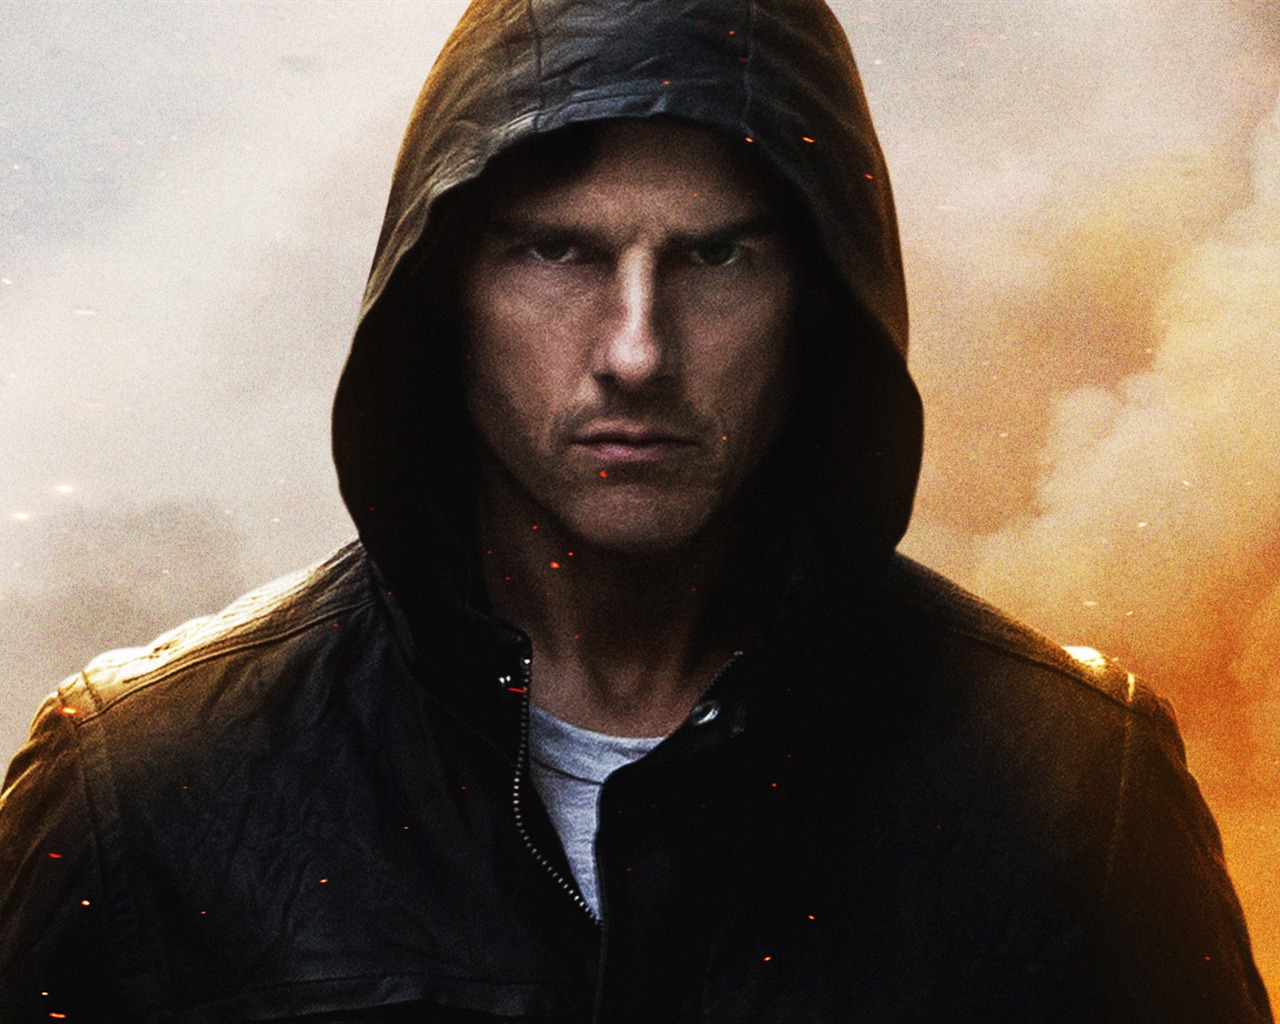 Mission: Impossible - Ghost Protocol 碟中谍4 高清壁纸3 - 1280x1024